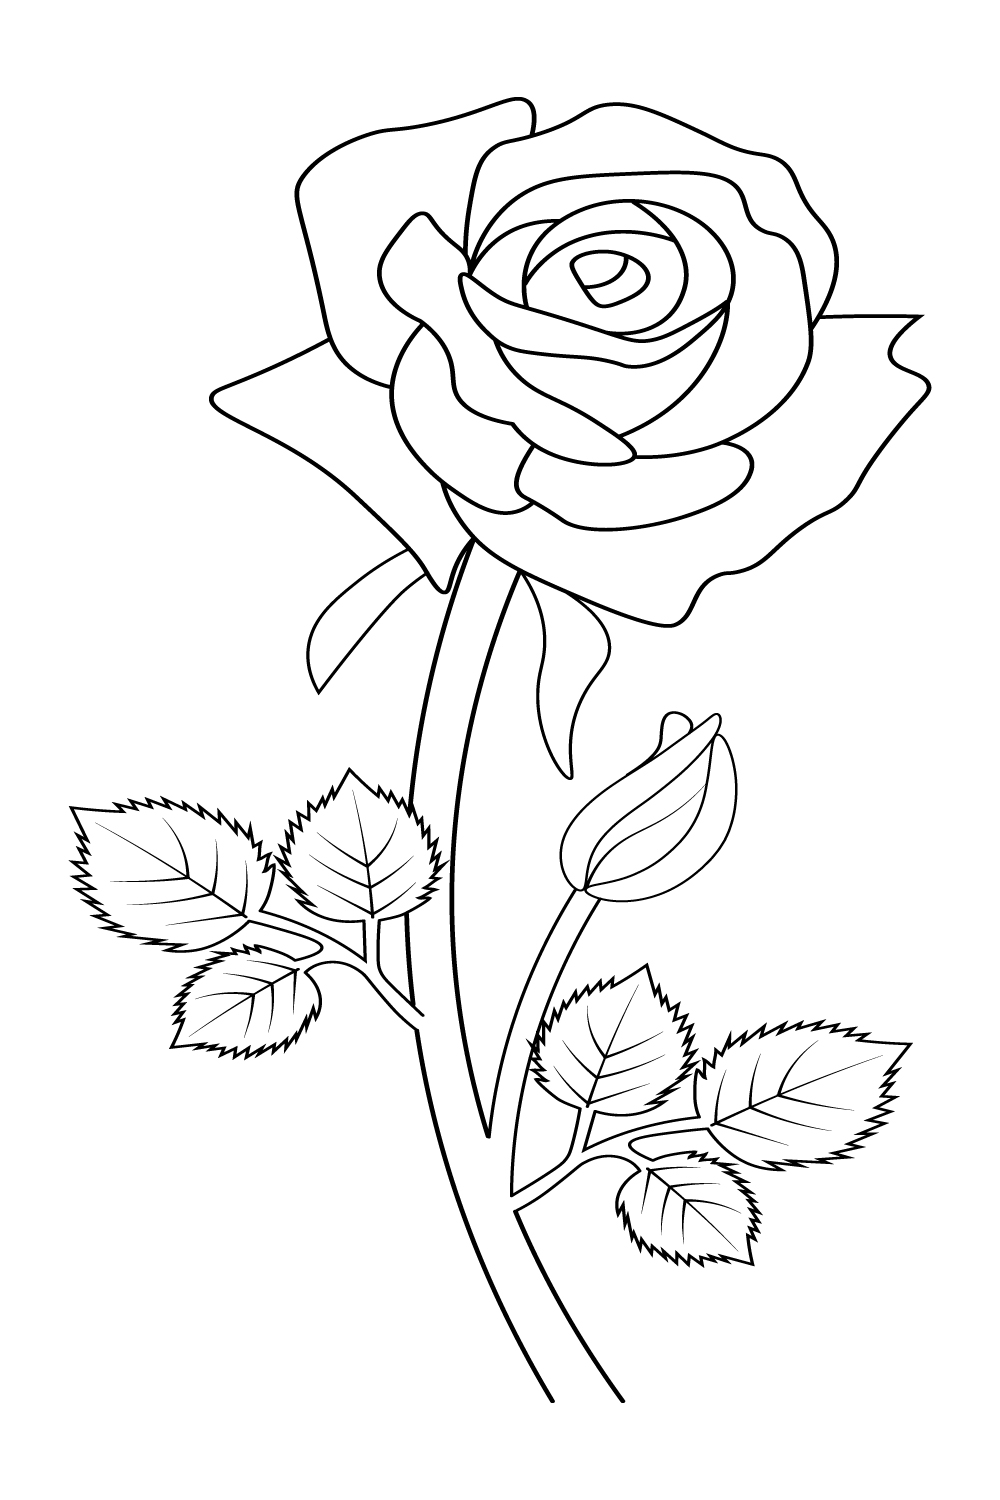 rose pencil sketch, rose pencil sketch drawing flower, rose outline drawing, rose coloring page, rose flower illustrations, red rose drawing, rose vector, hand drawing rose flower, realistic rose flower pinterest preview image.